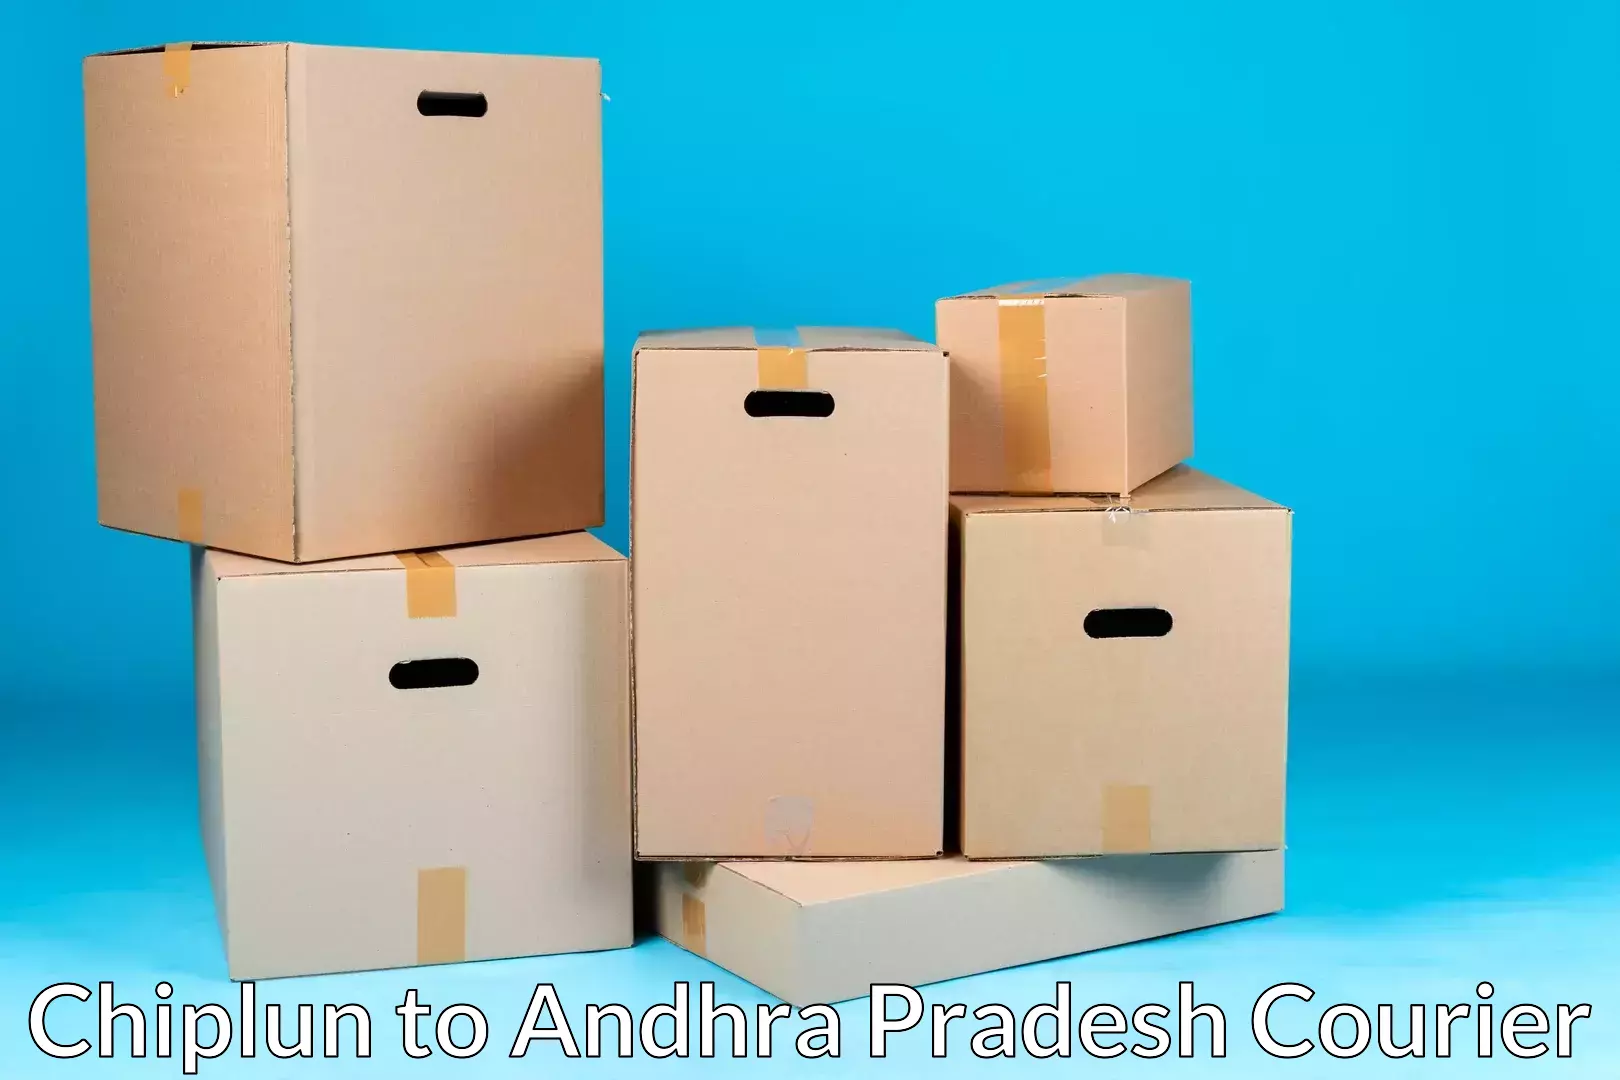 Professional movers Chiplun to Sirvella